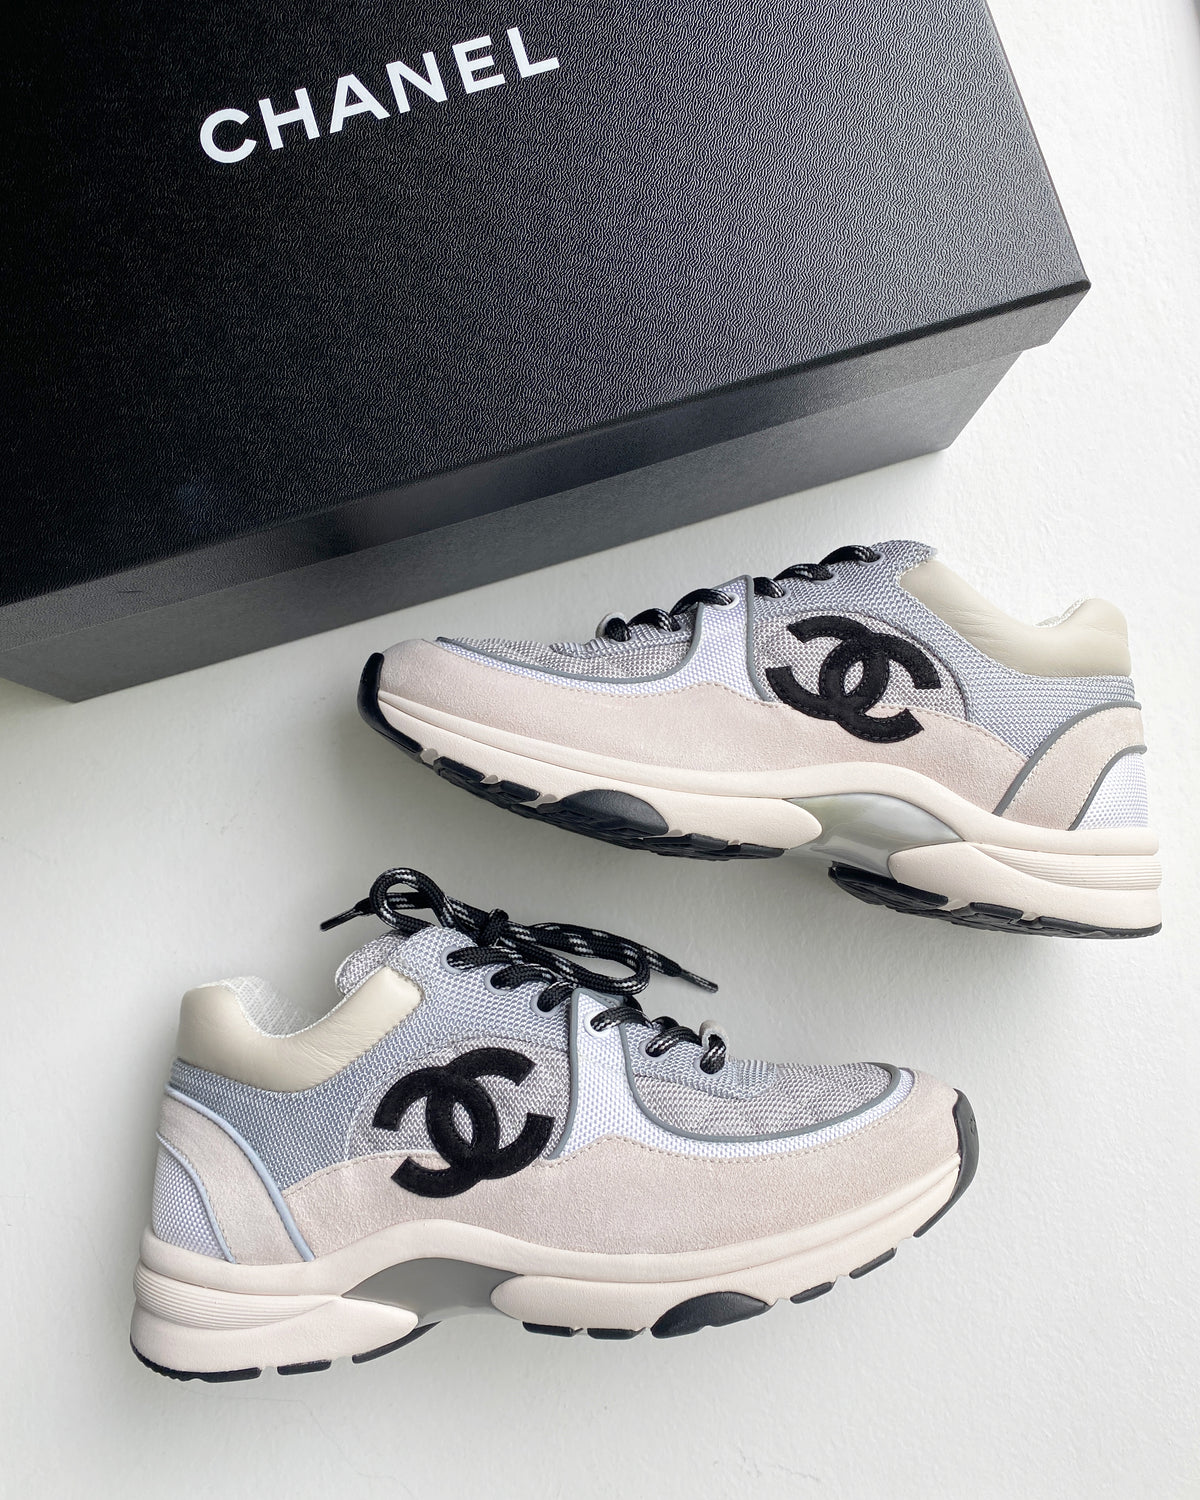 Shop at Chanel CC Logo Fabric & Suede Sneaker Grey (Reflective) Chanel .  Find the newest styles products, brands and brands on the internet today